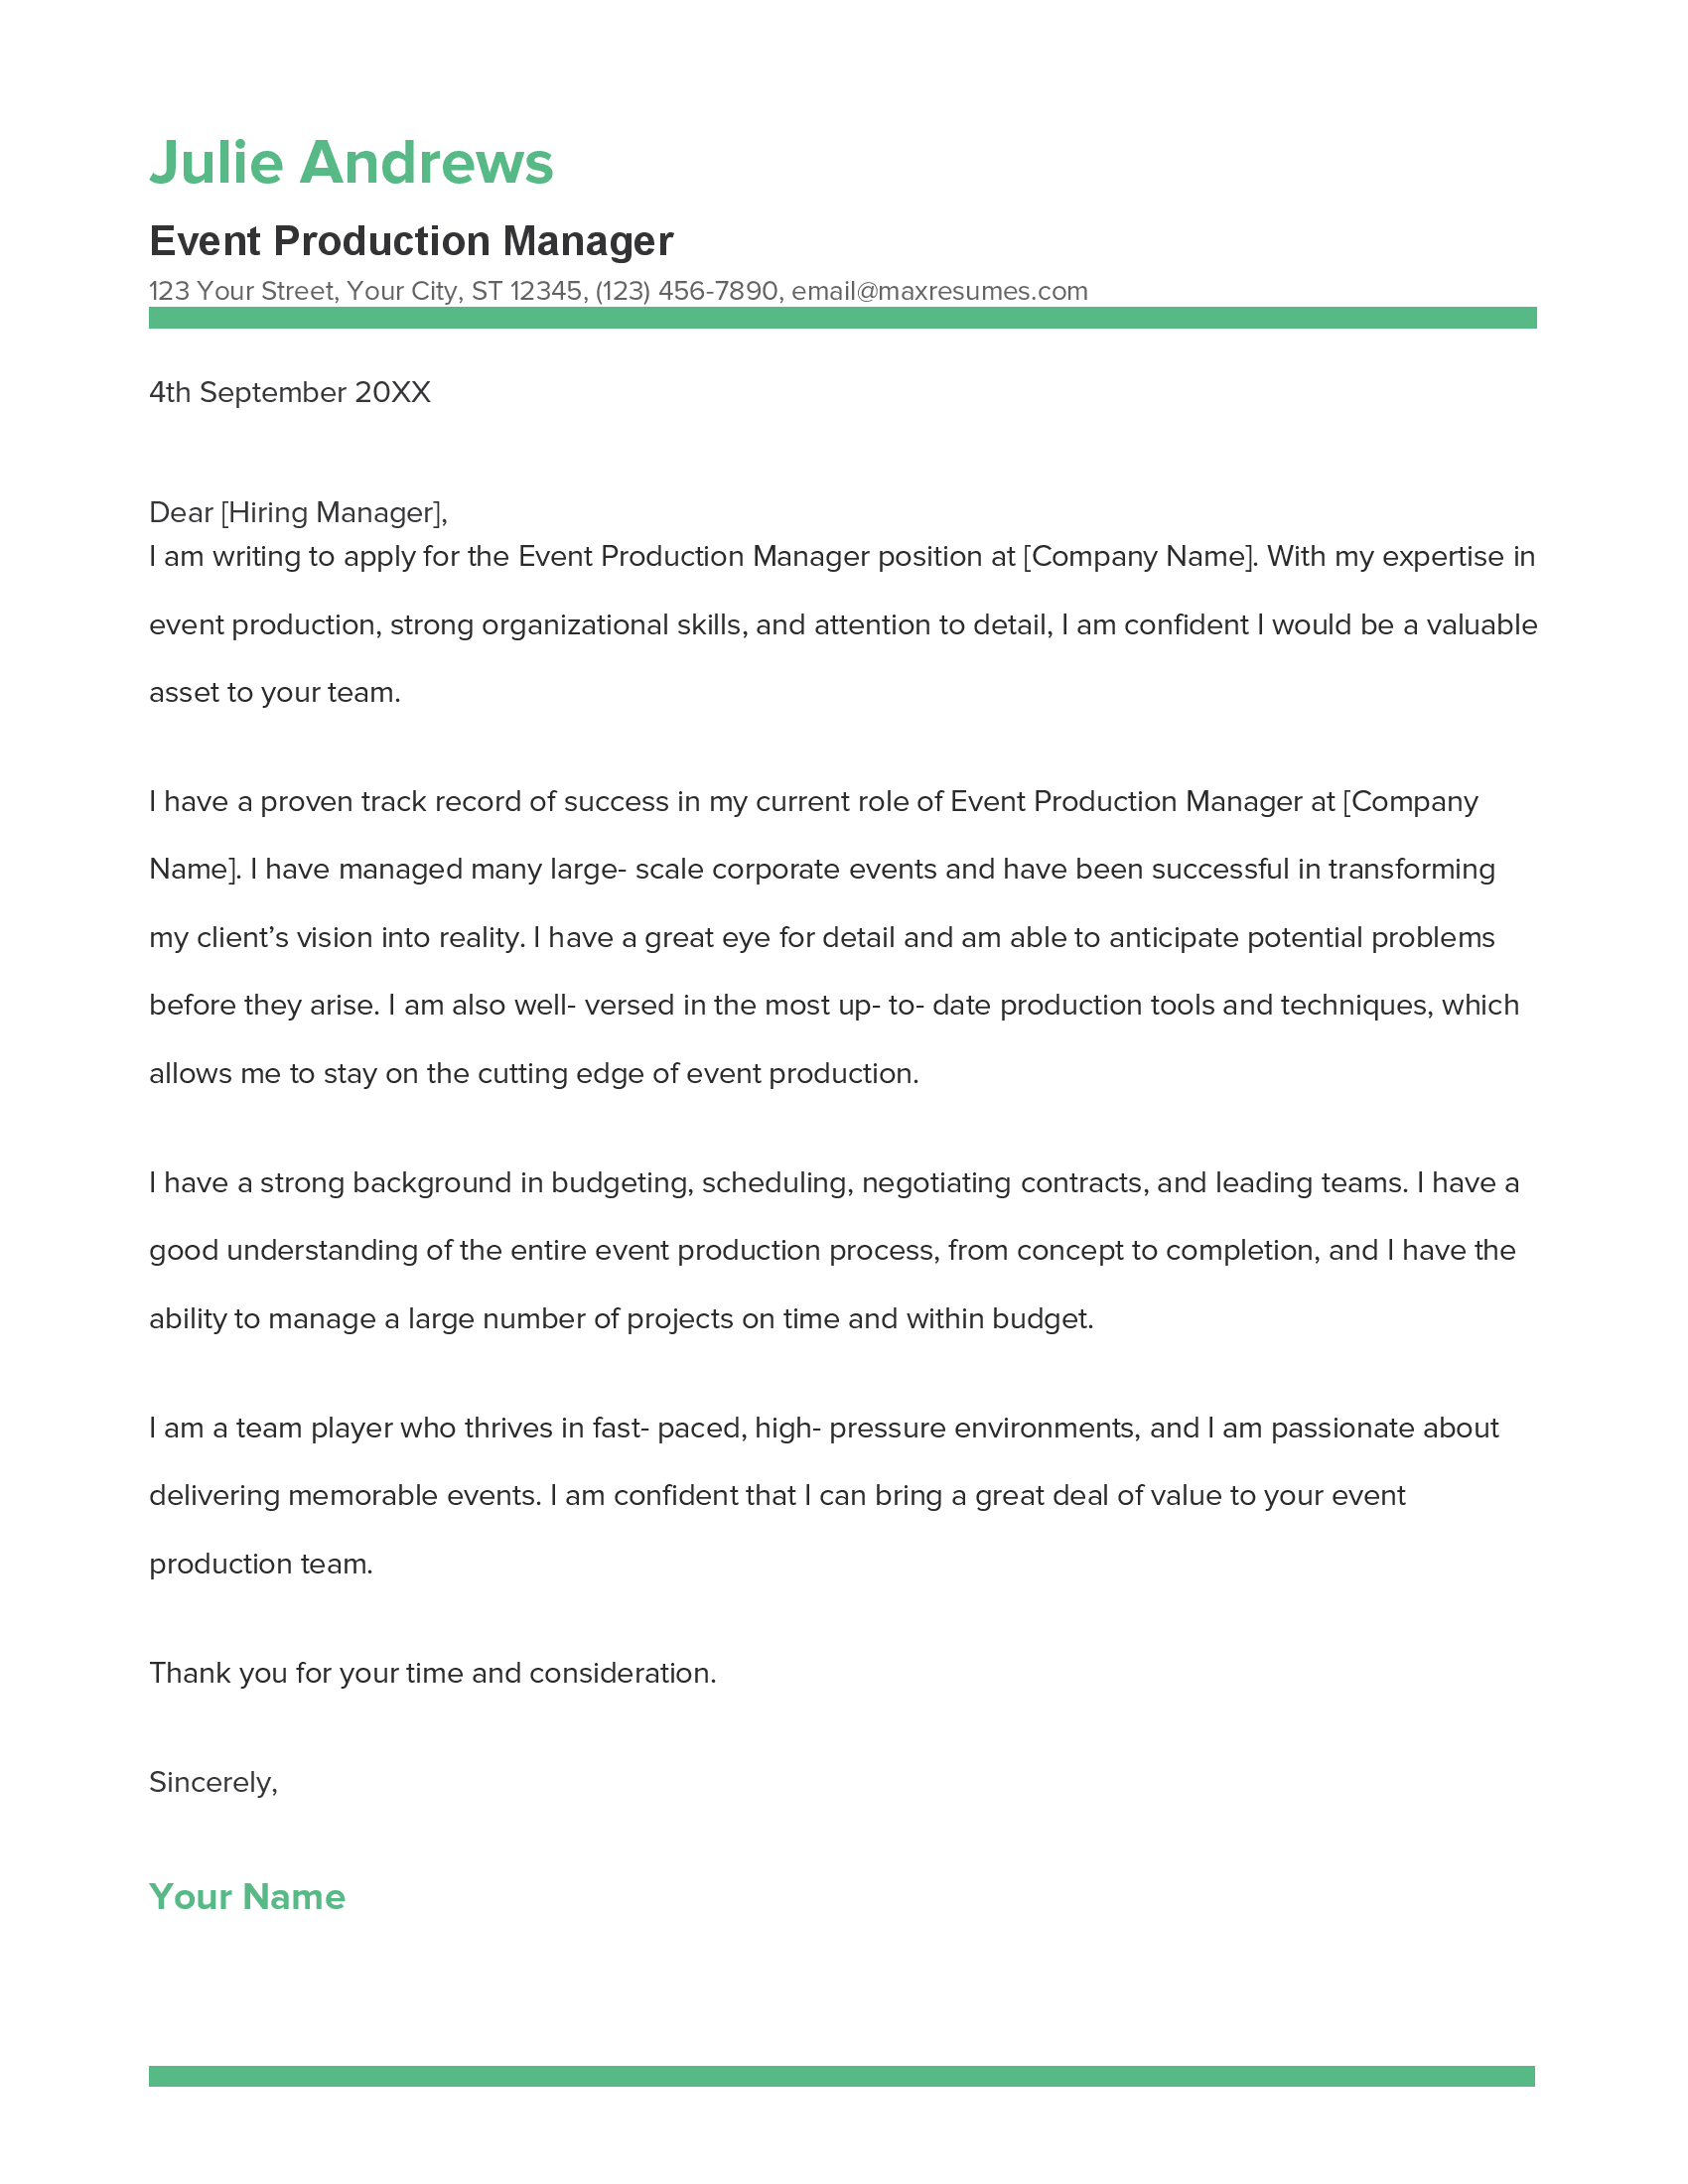 Event Production Manager Cover Letter Example